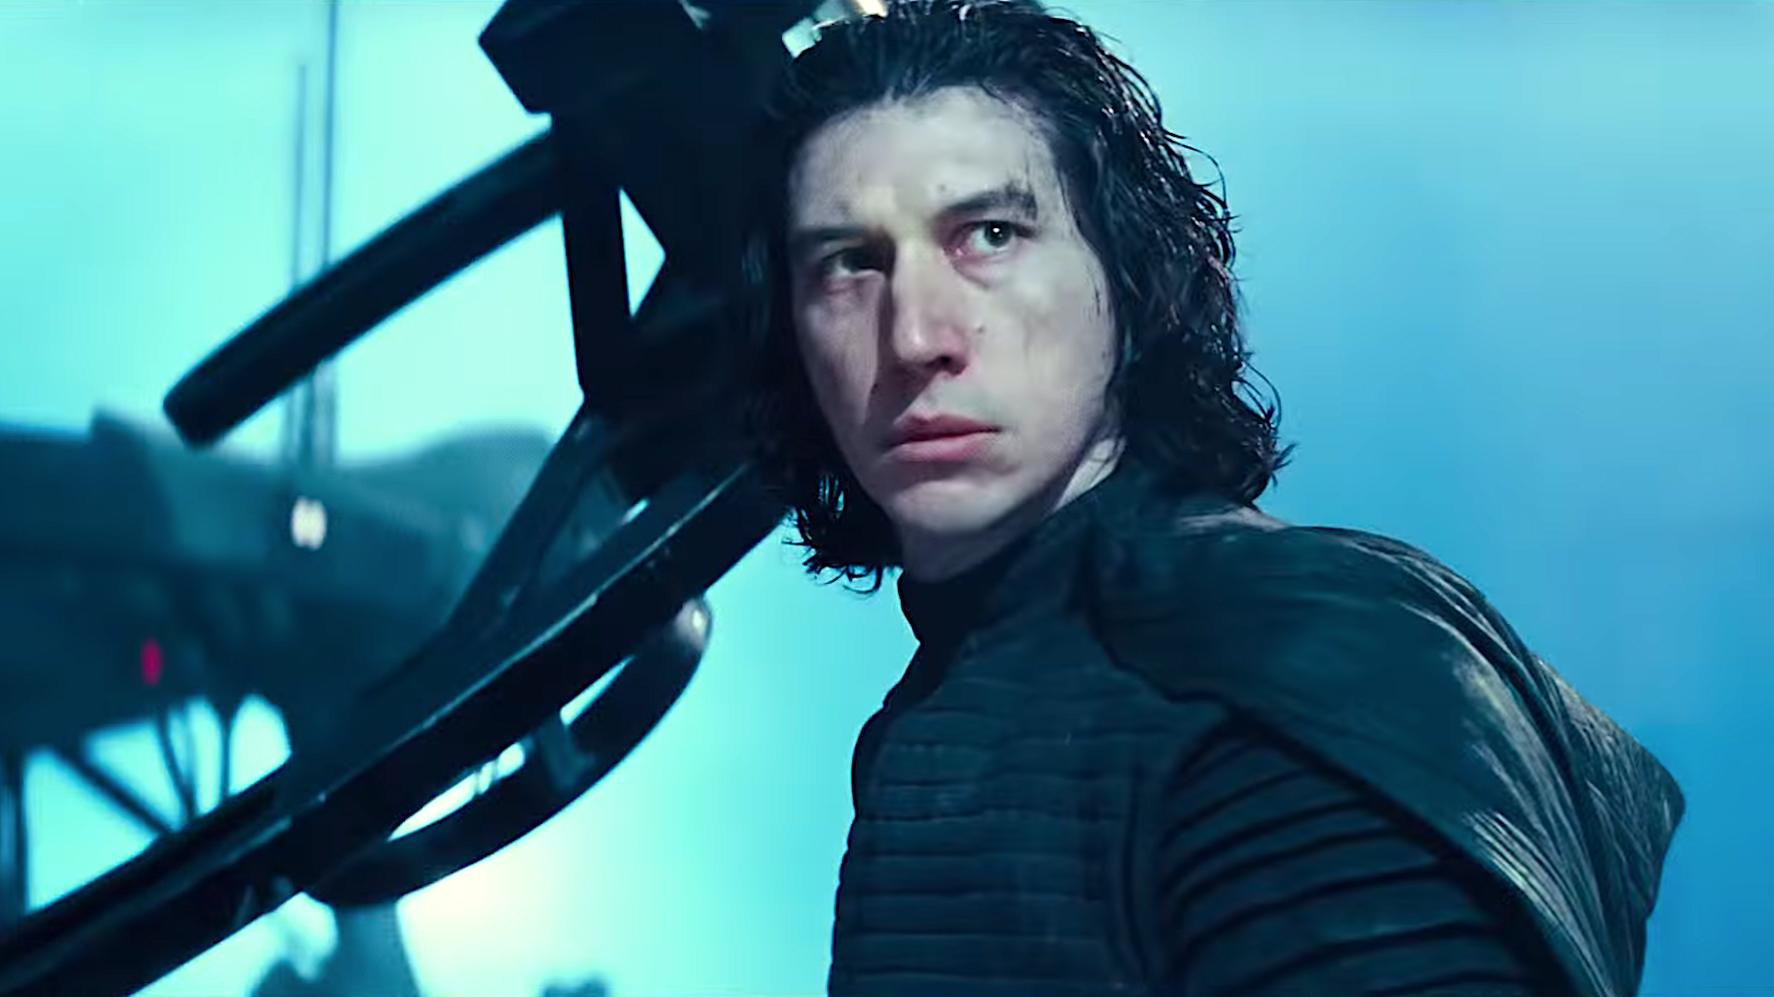 Ben Solo, who fell to the dark side as Kylo Ren, will be getting a new prequel series in the near future.